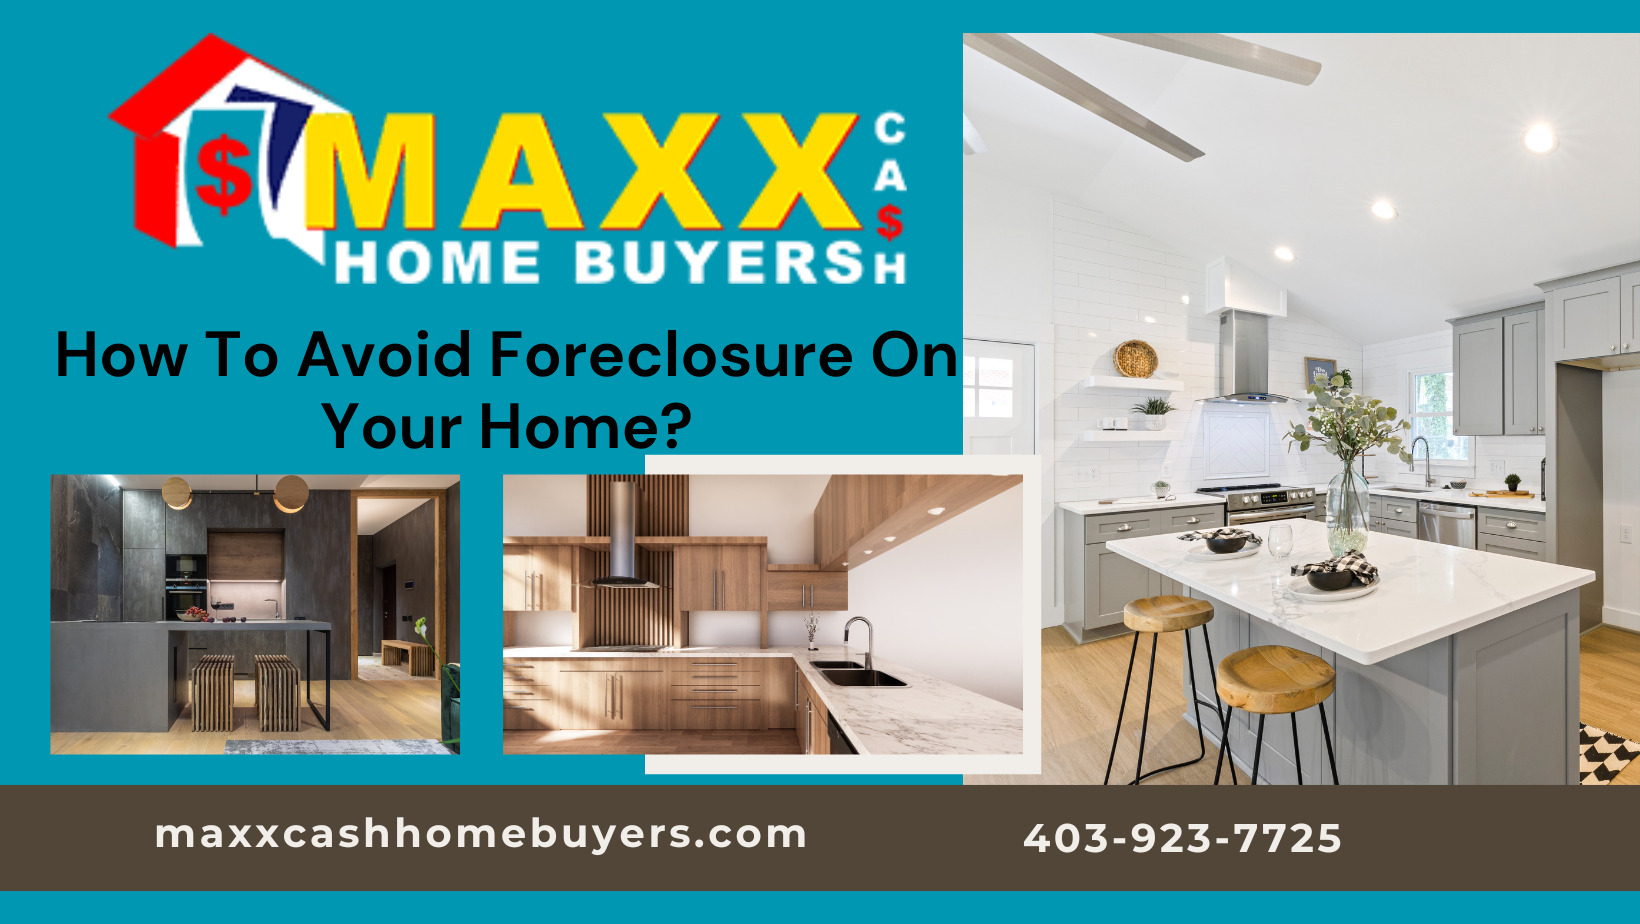 How To Avoid Foreclosure On Your Home?